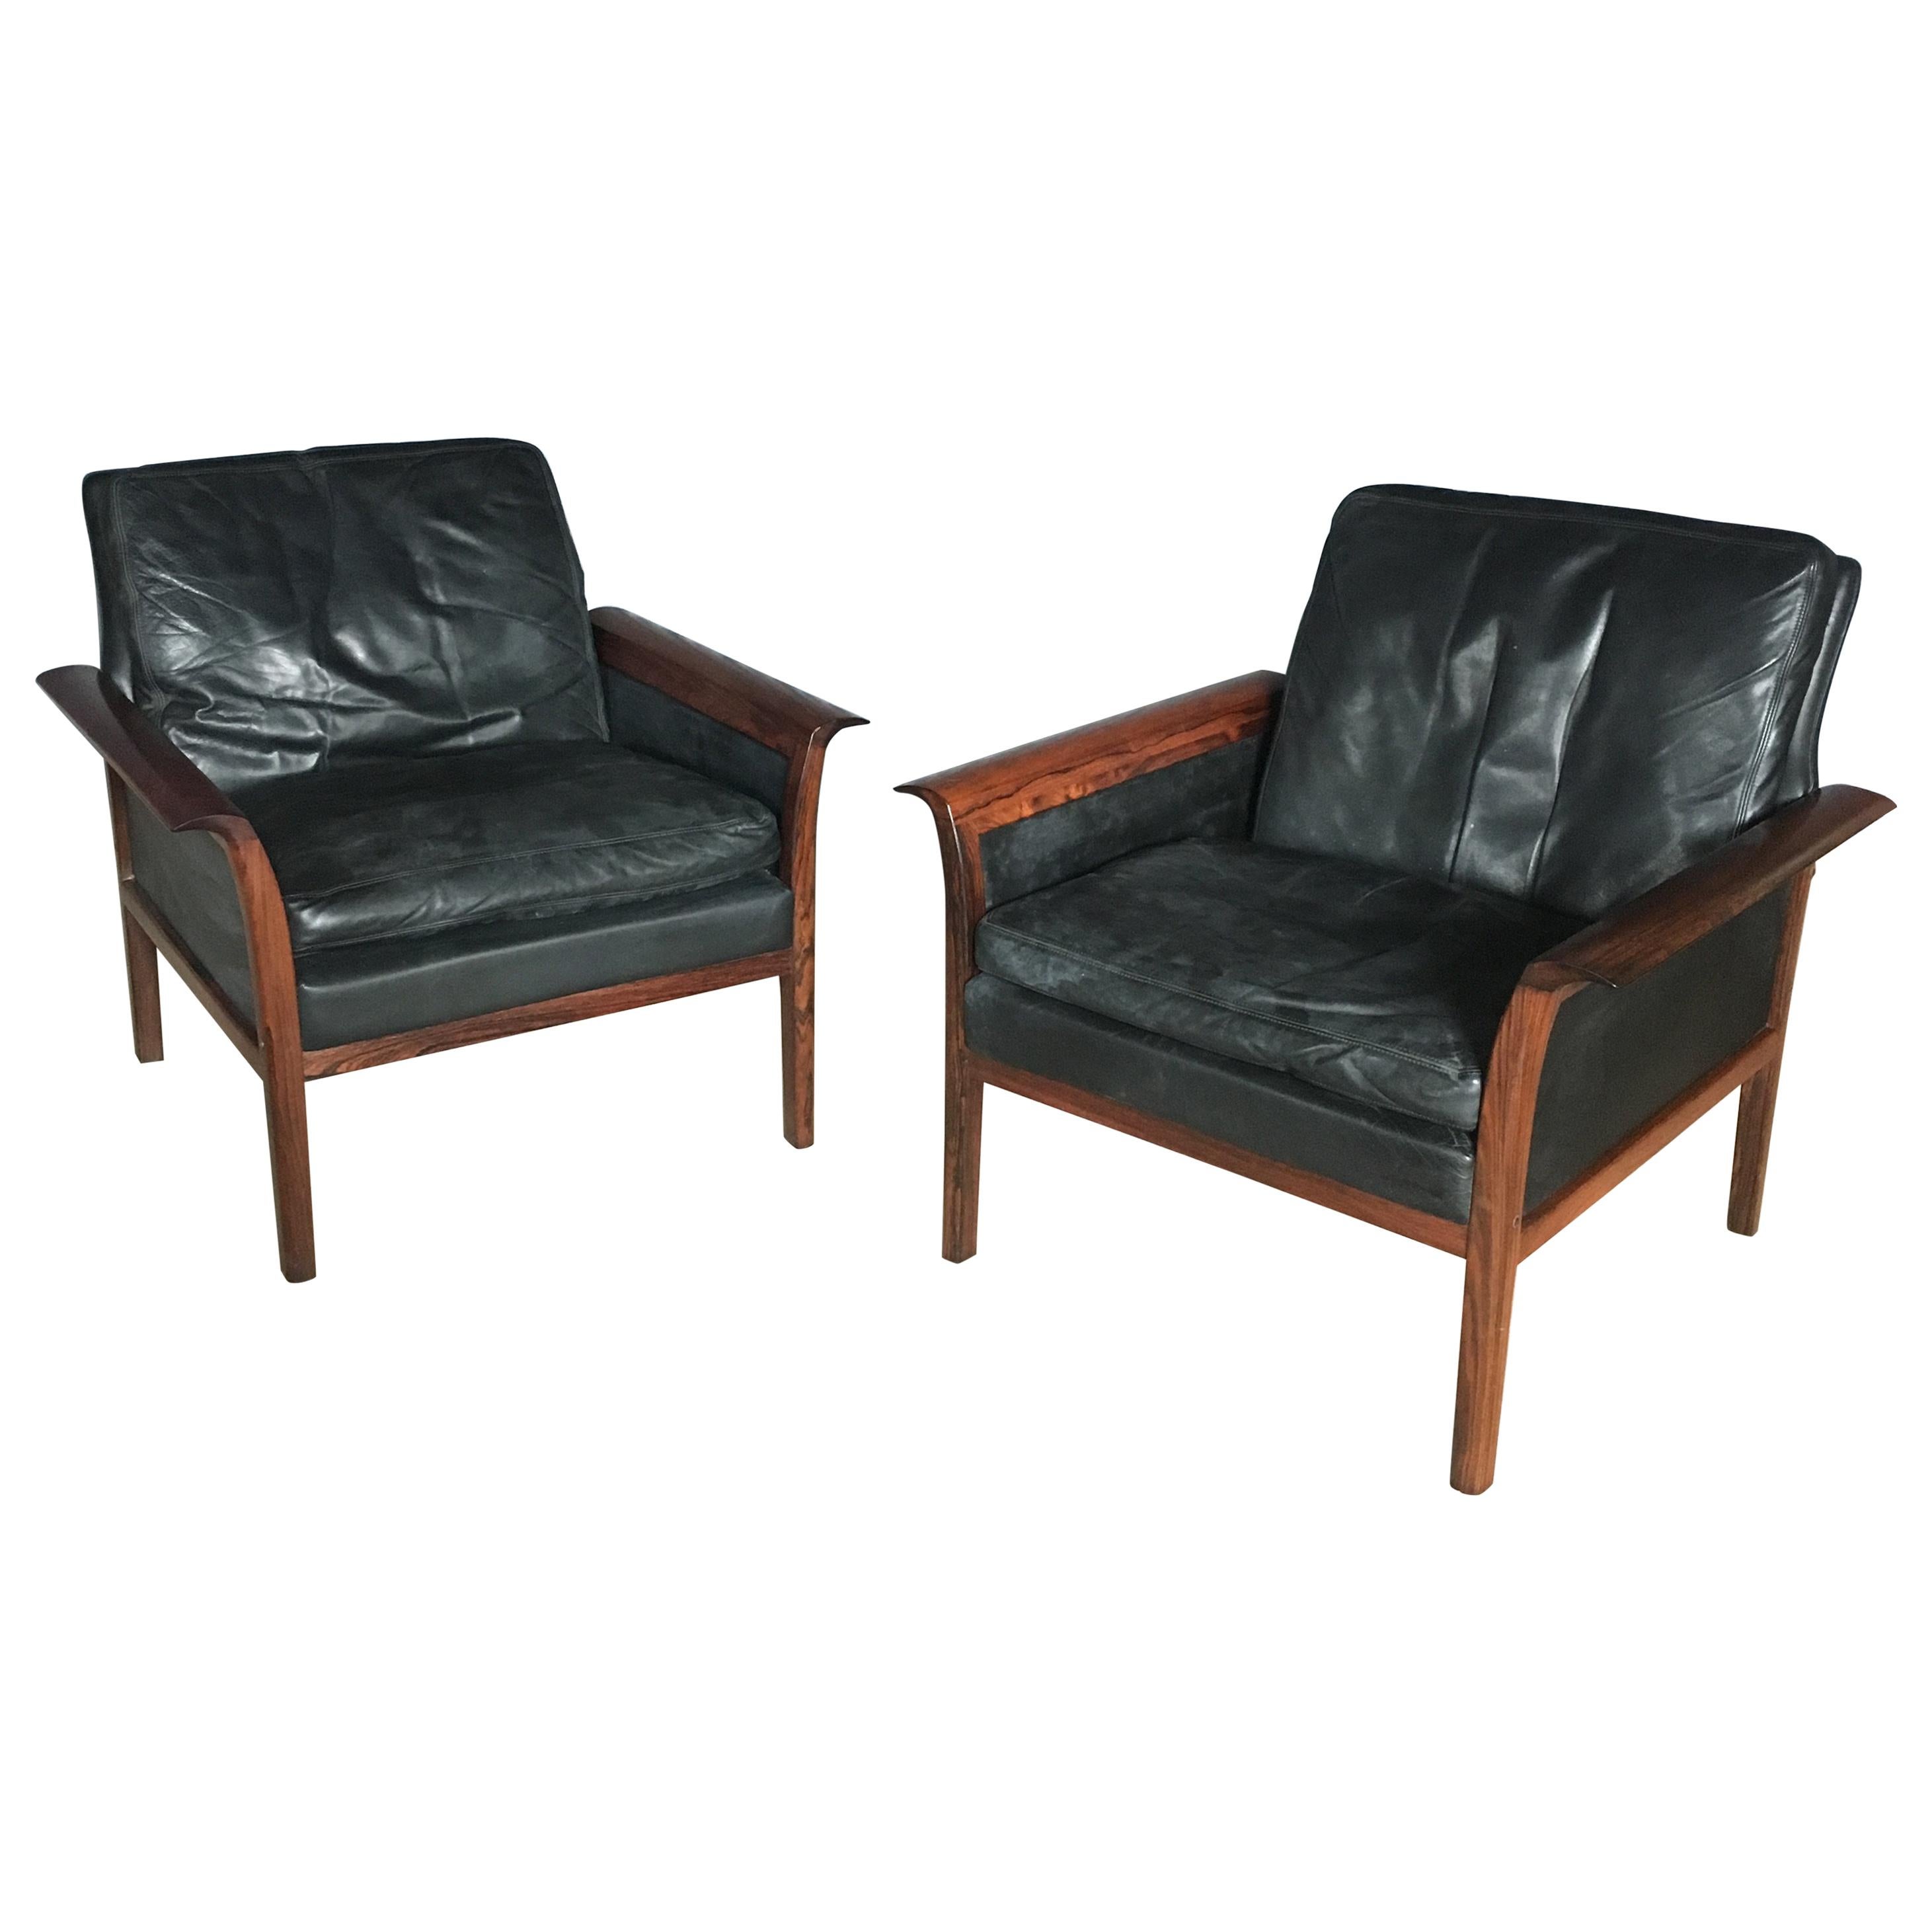 Knut Saeter for Vatner Mobler Leather and Rosewood Pair of Chairs